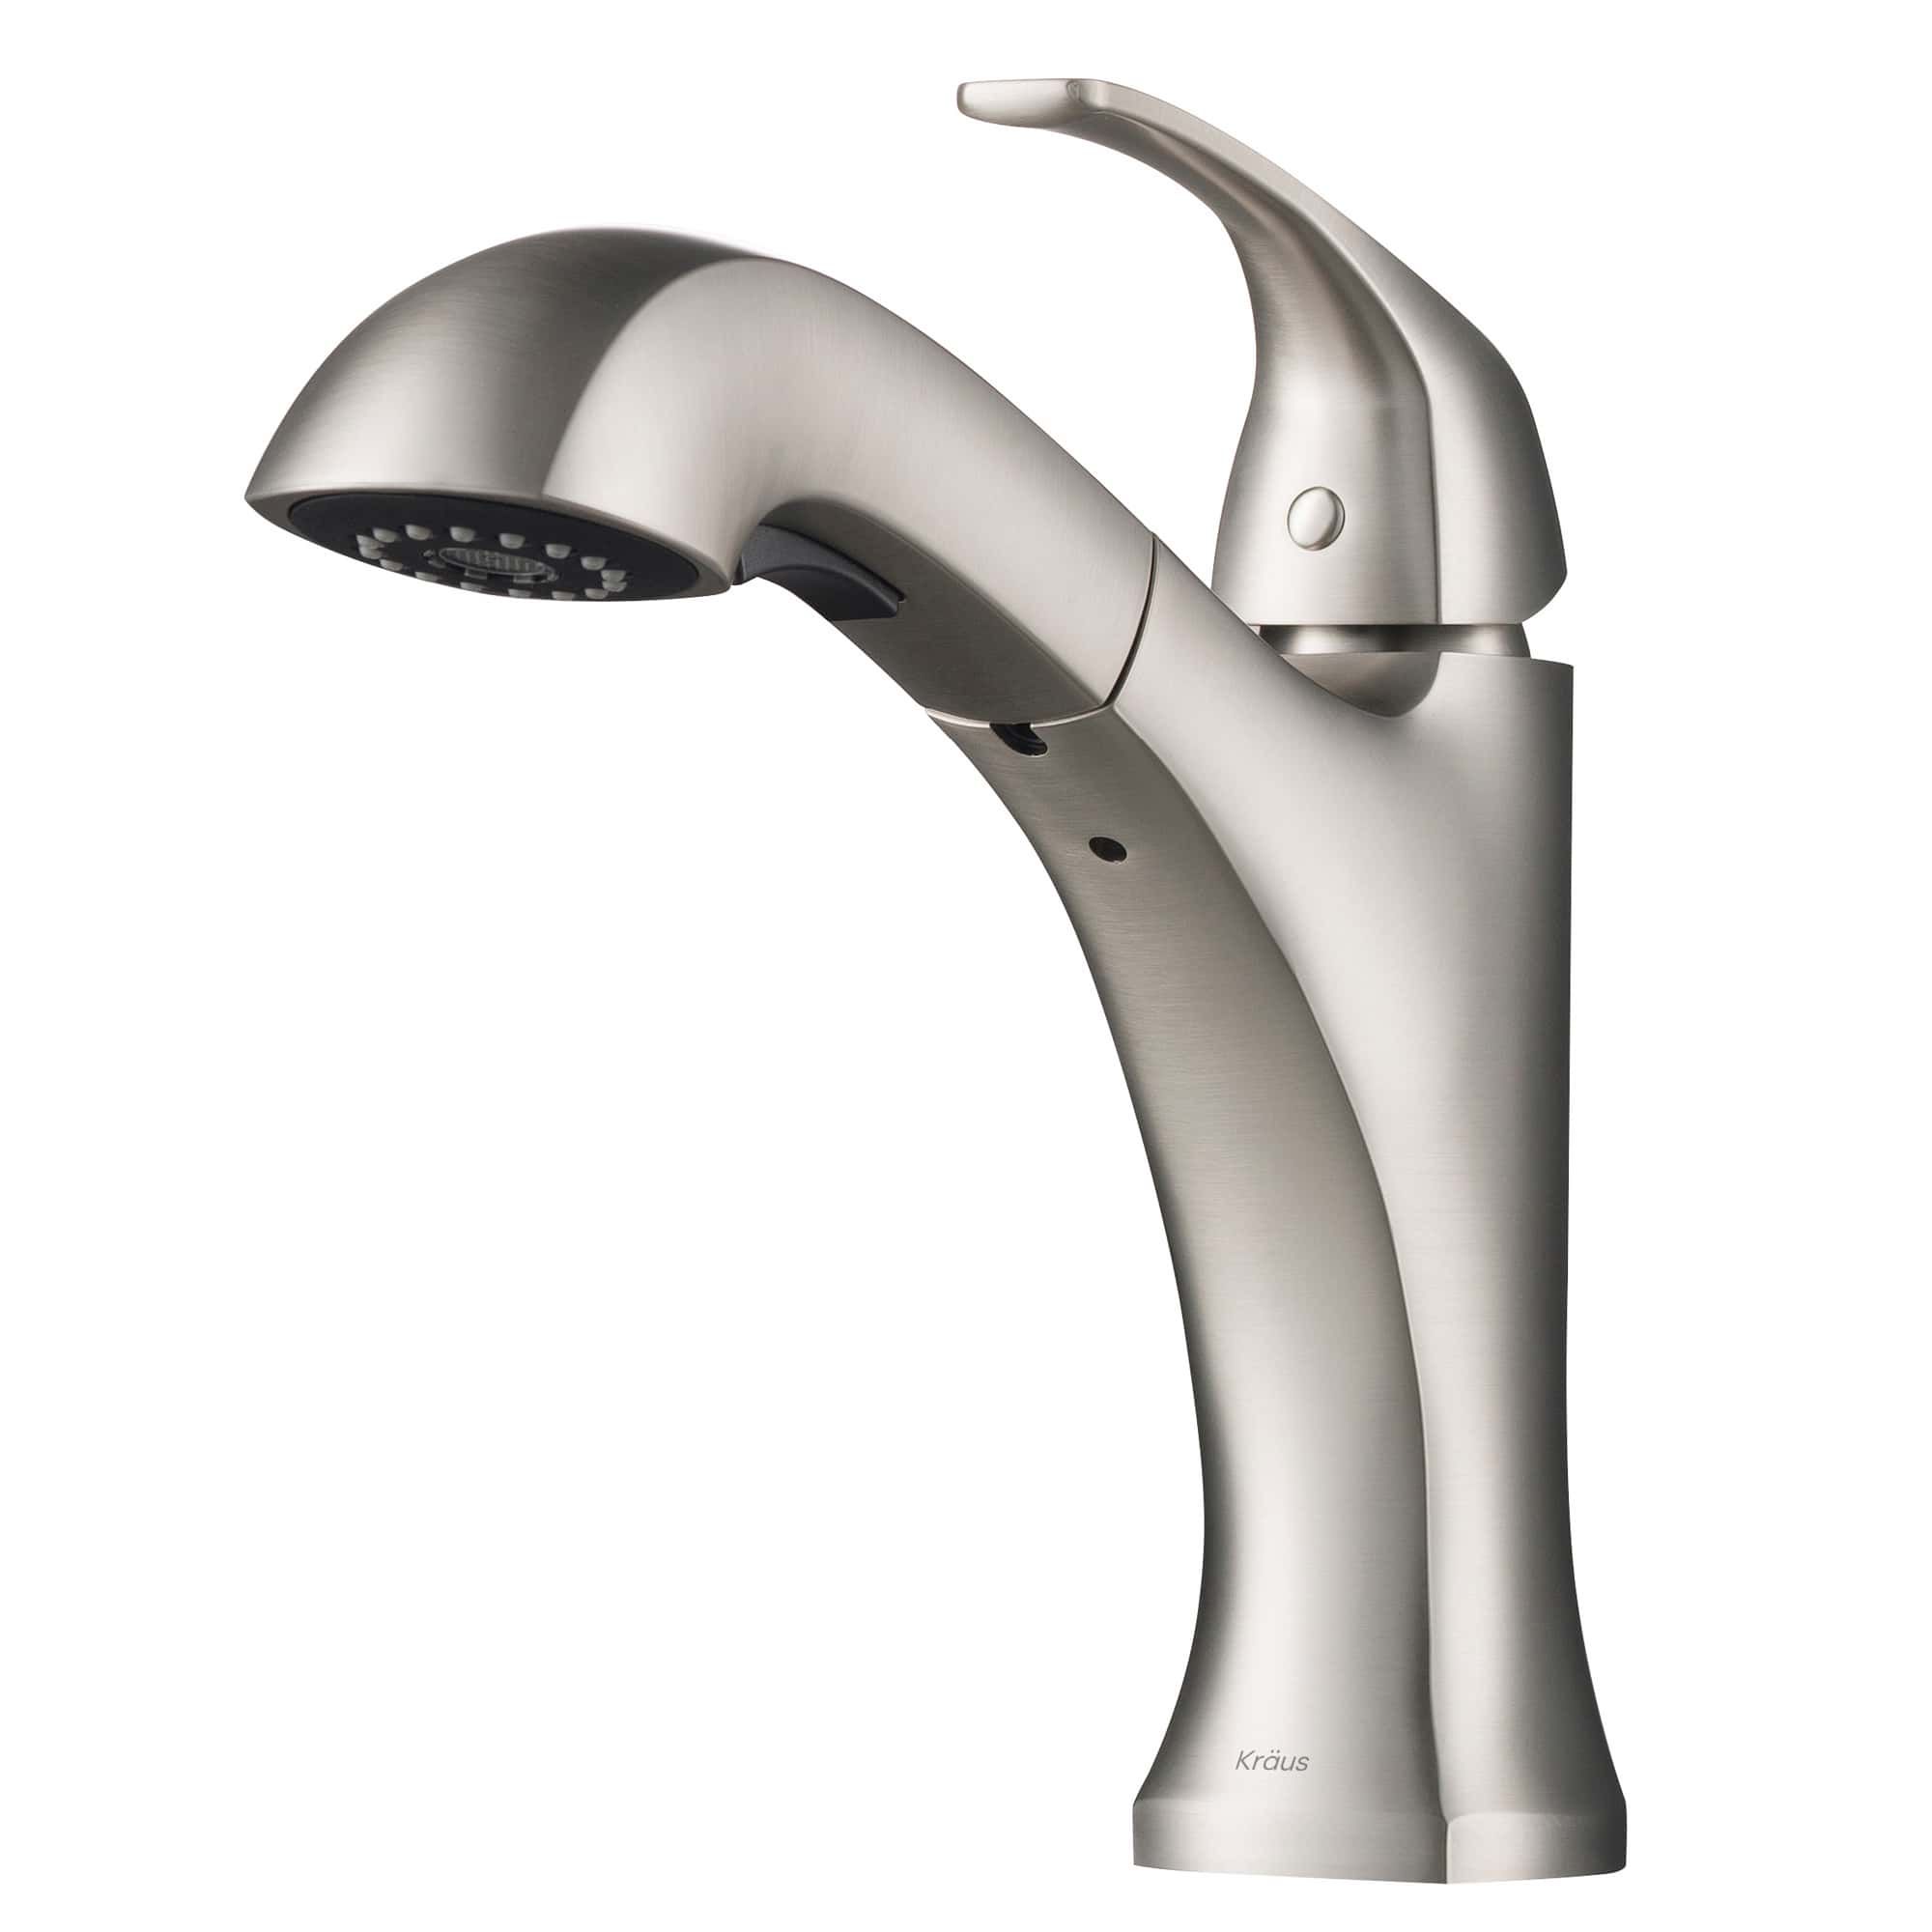 Pull-Out Or Pull-Down Kitchen Faucet – Which One Do You Need?